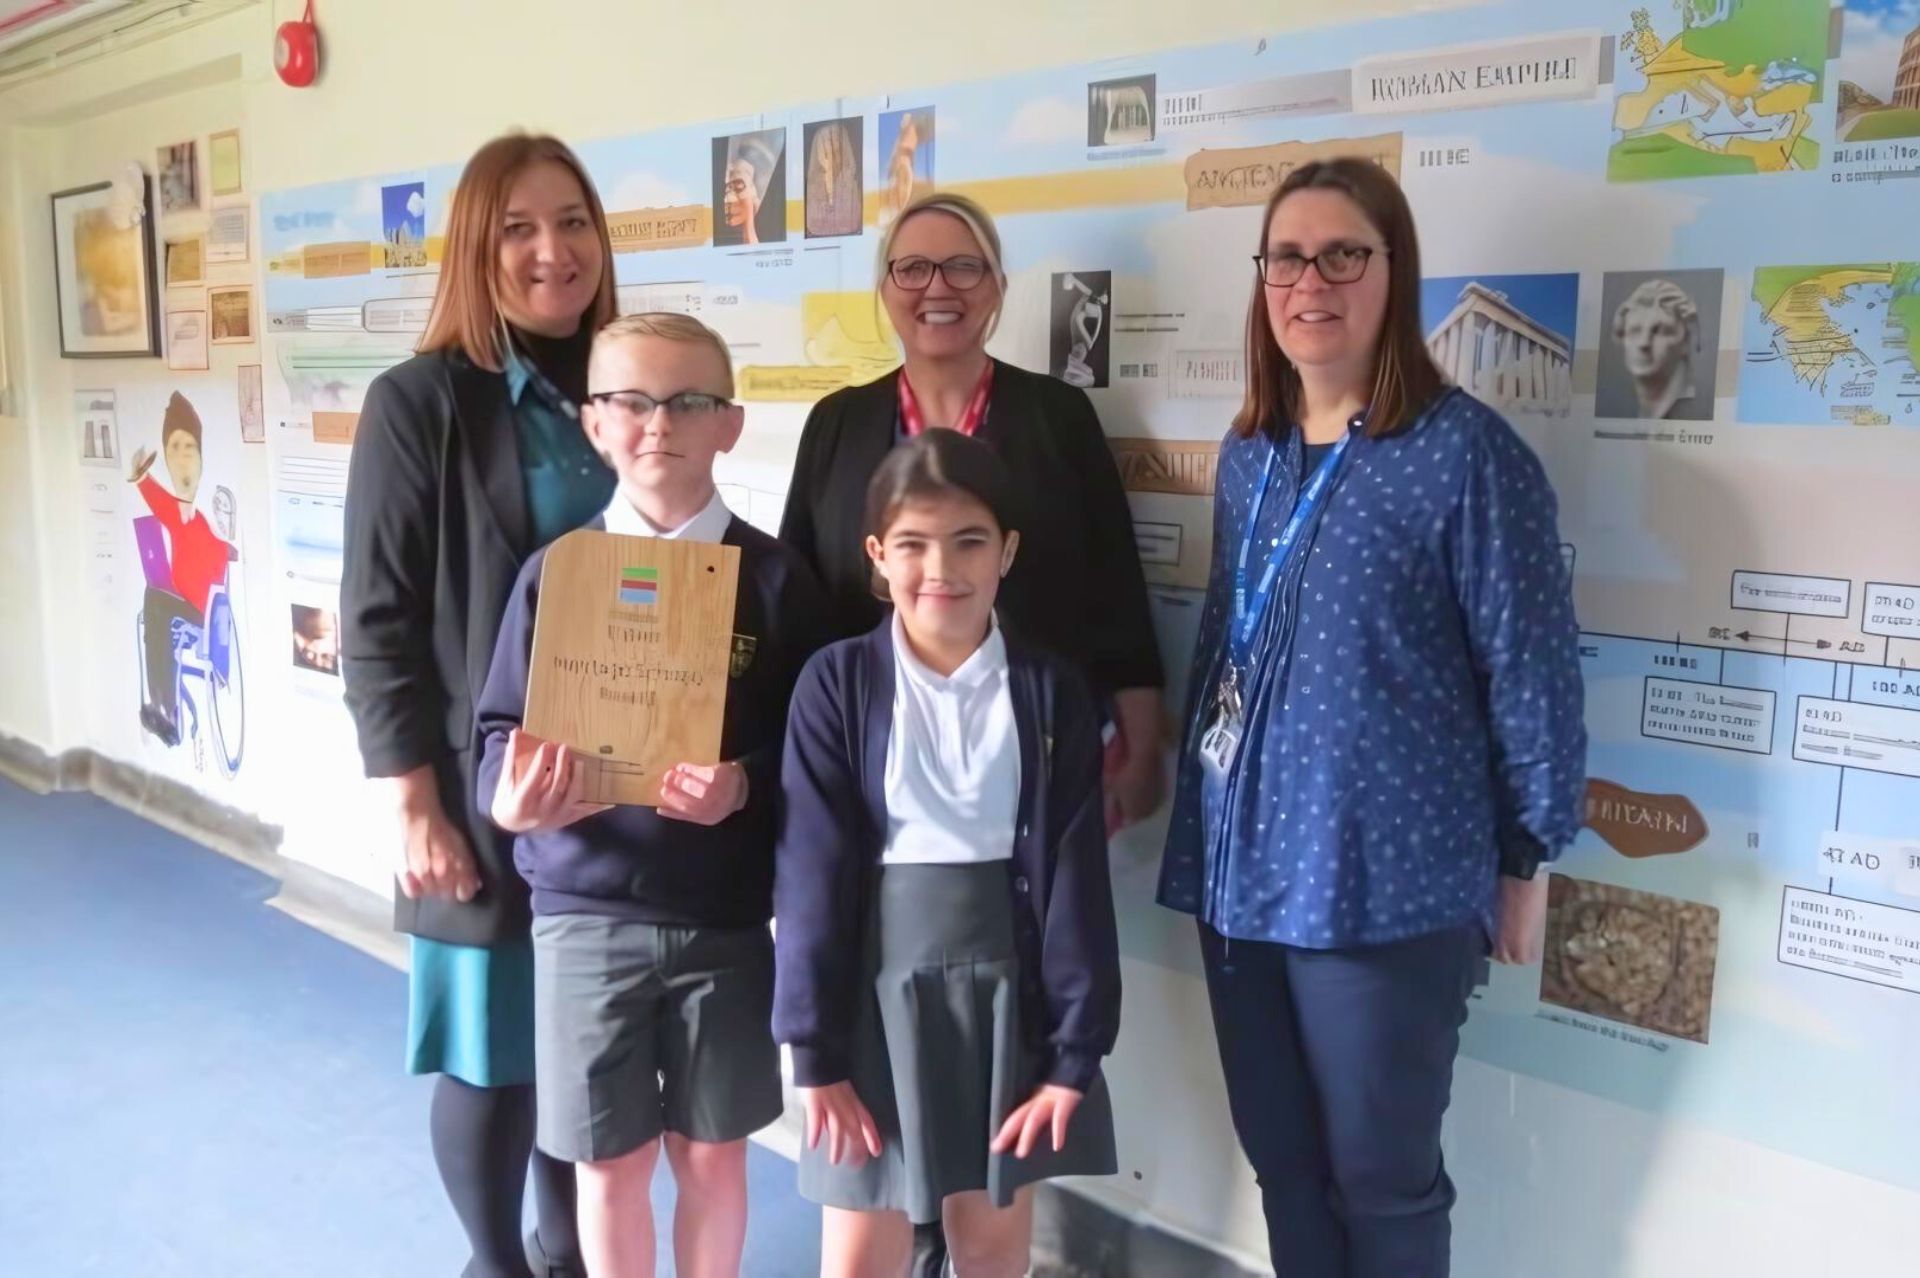 A couple of pupils and teachers pose for a photo with the Heritage Award